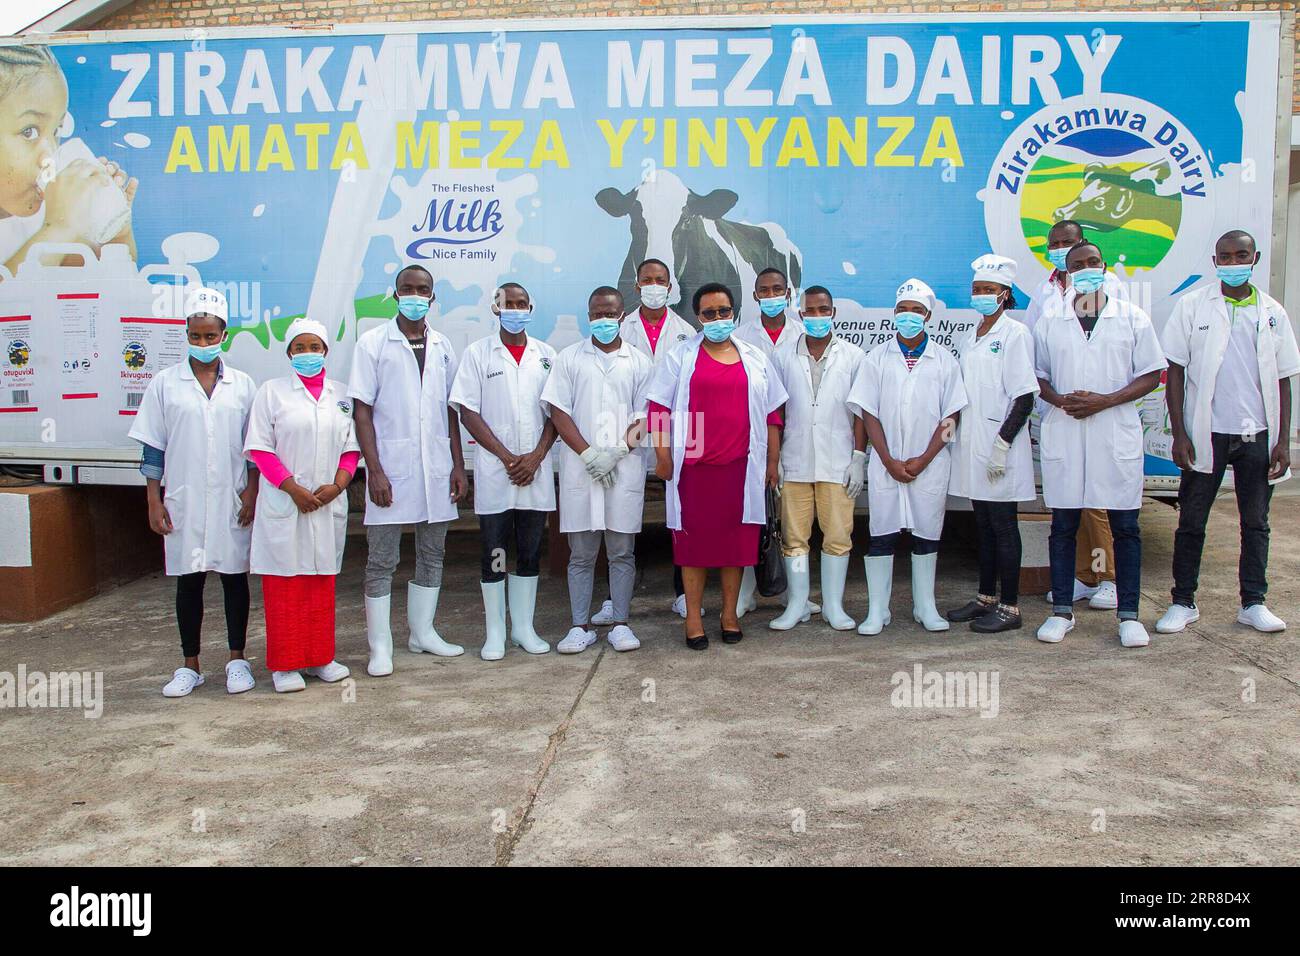 210502 -- NYANZA, May 2, 2021 -- Immaculee Kayitesi C, owner of Zirakamwa Meza Dairy, poses for a group photo with employees of her company in Nyanza district, about a two-hour drive from the Rwandan capital city Kigali, on April 30, 2021. TO GO WITH Feature: From genocide widow to successful businesswoman -- Rwandan woman walking out of shadow photo by /Xinhua RWANDA-NYANZA-GENOCIDE-BUSINESS WOMAN CyrilxNdegeya PUBLICATIONxNOTxINxCHN Stock Photo